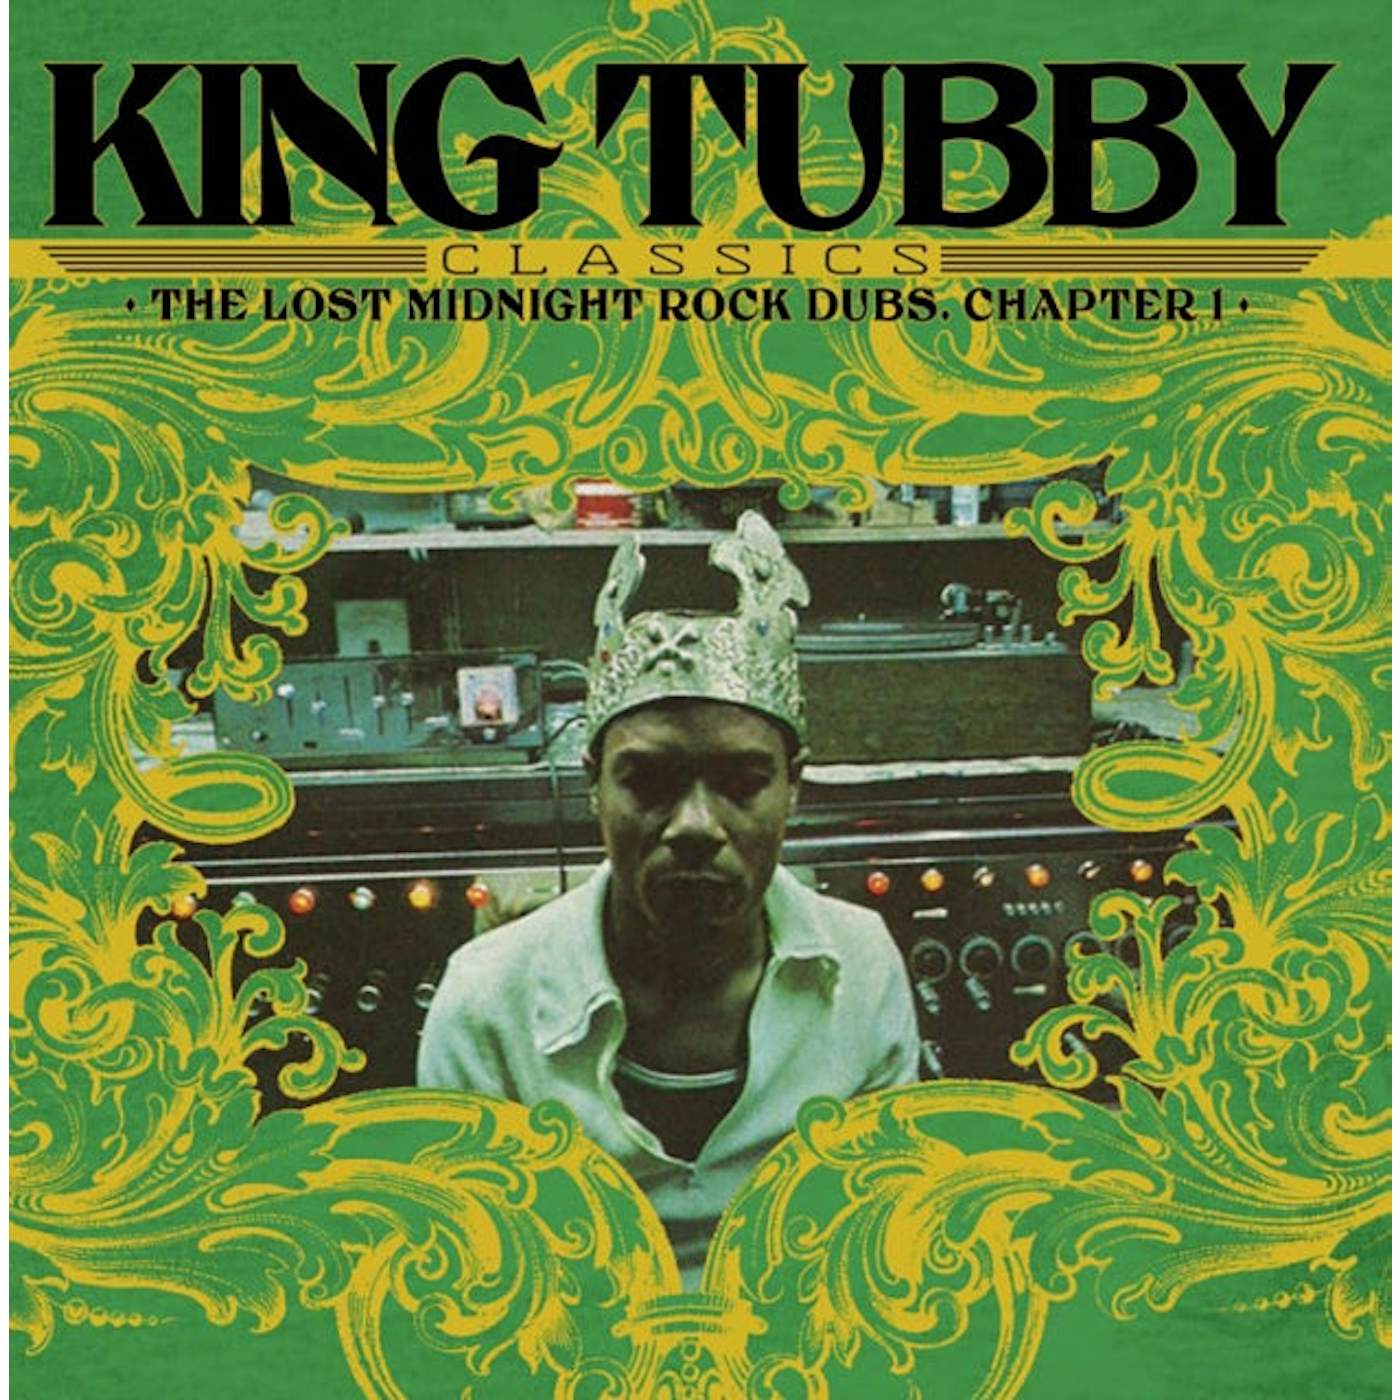 King Tubby LP Vinyl Record - King Tubby's Classics: The Lost Midnight Rock Dubs Chapter 1